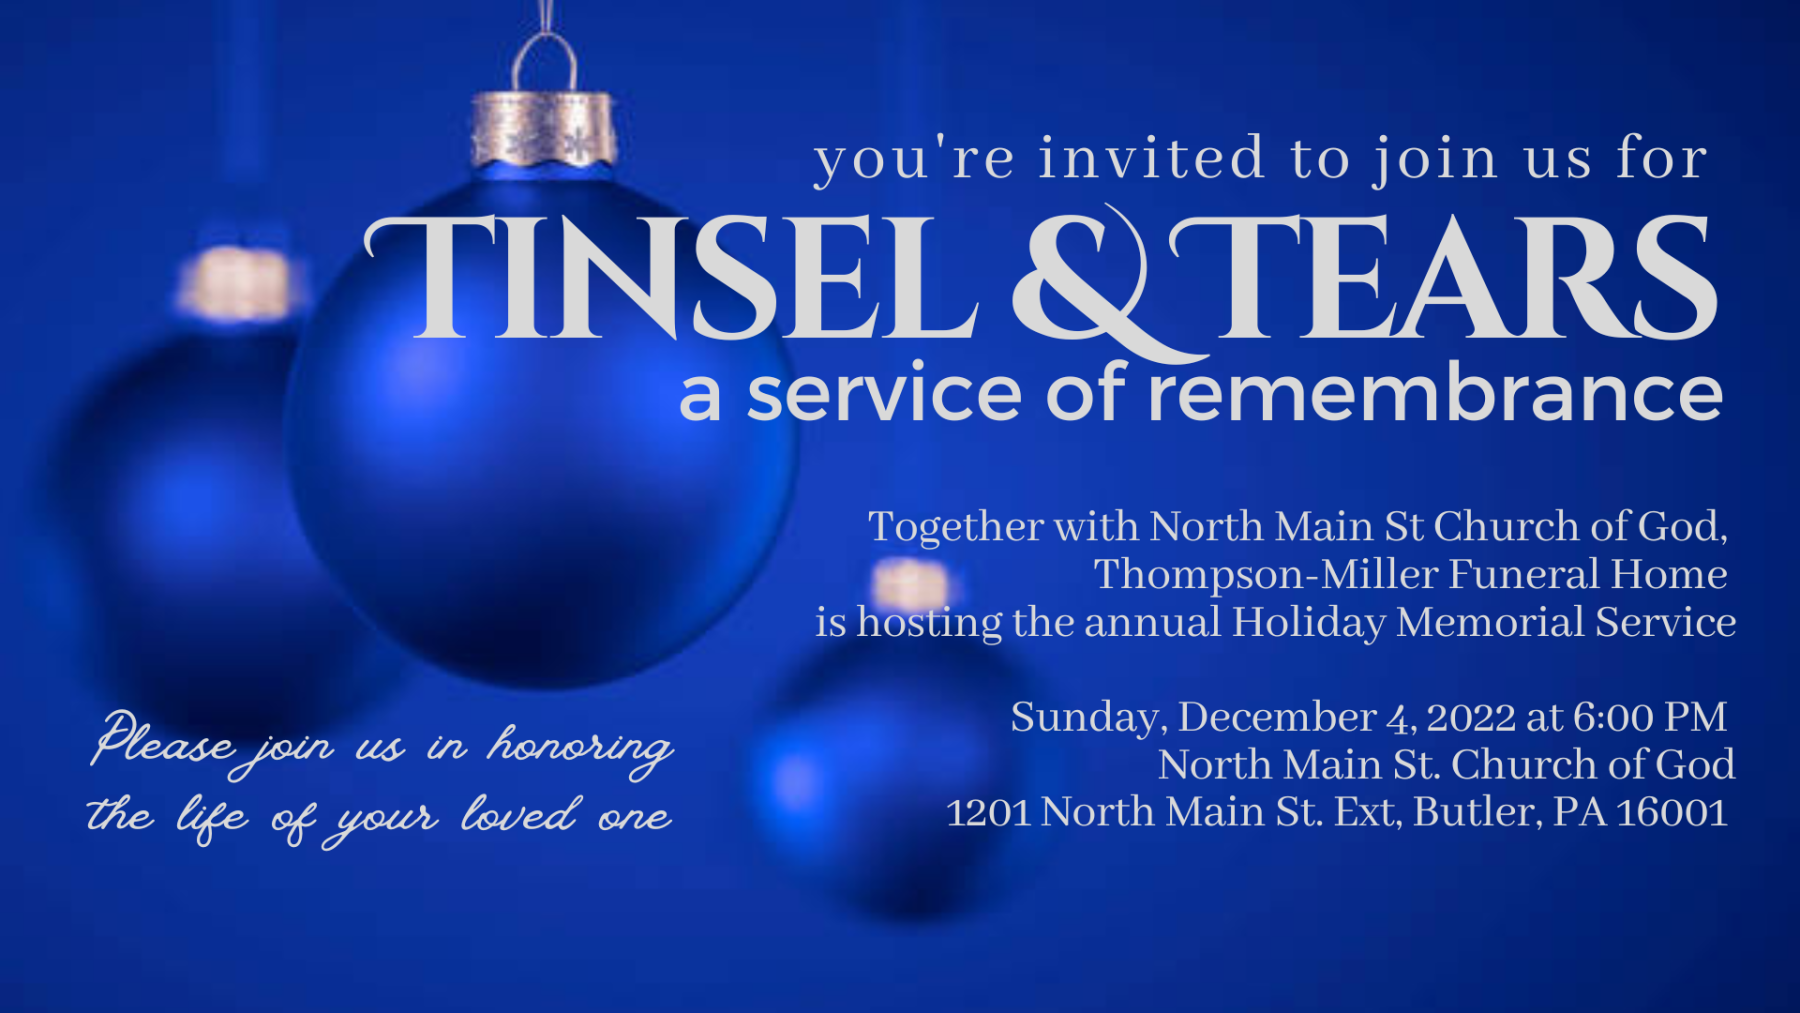 Tinsel & Tears: A Service of Rememberance